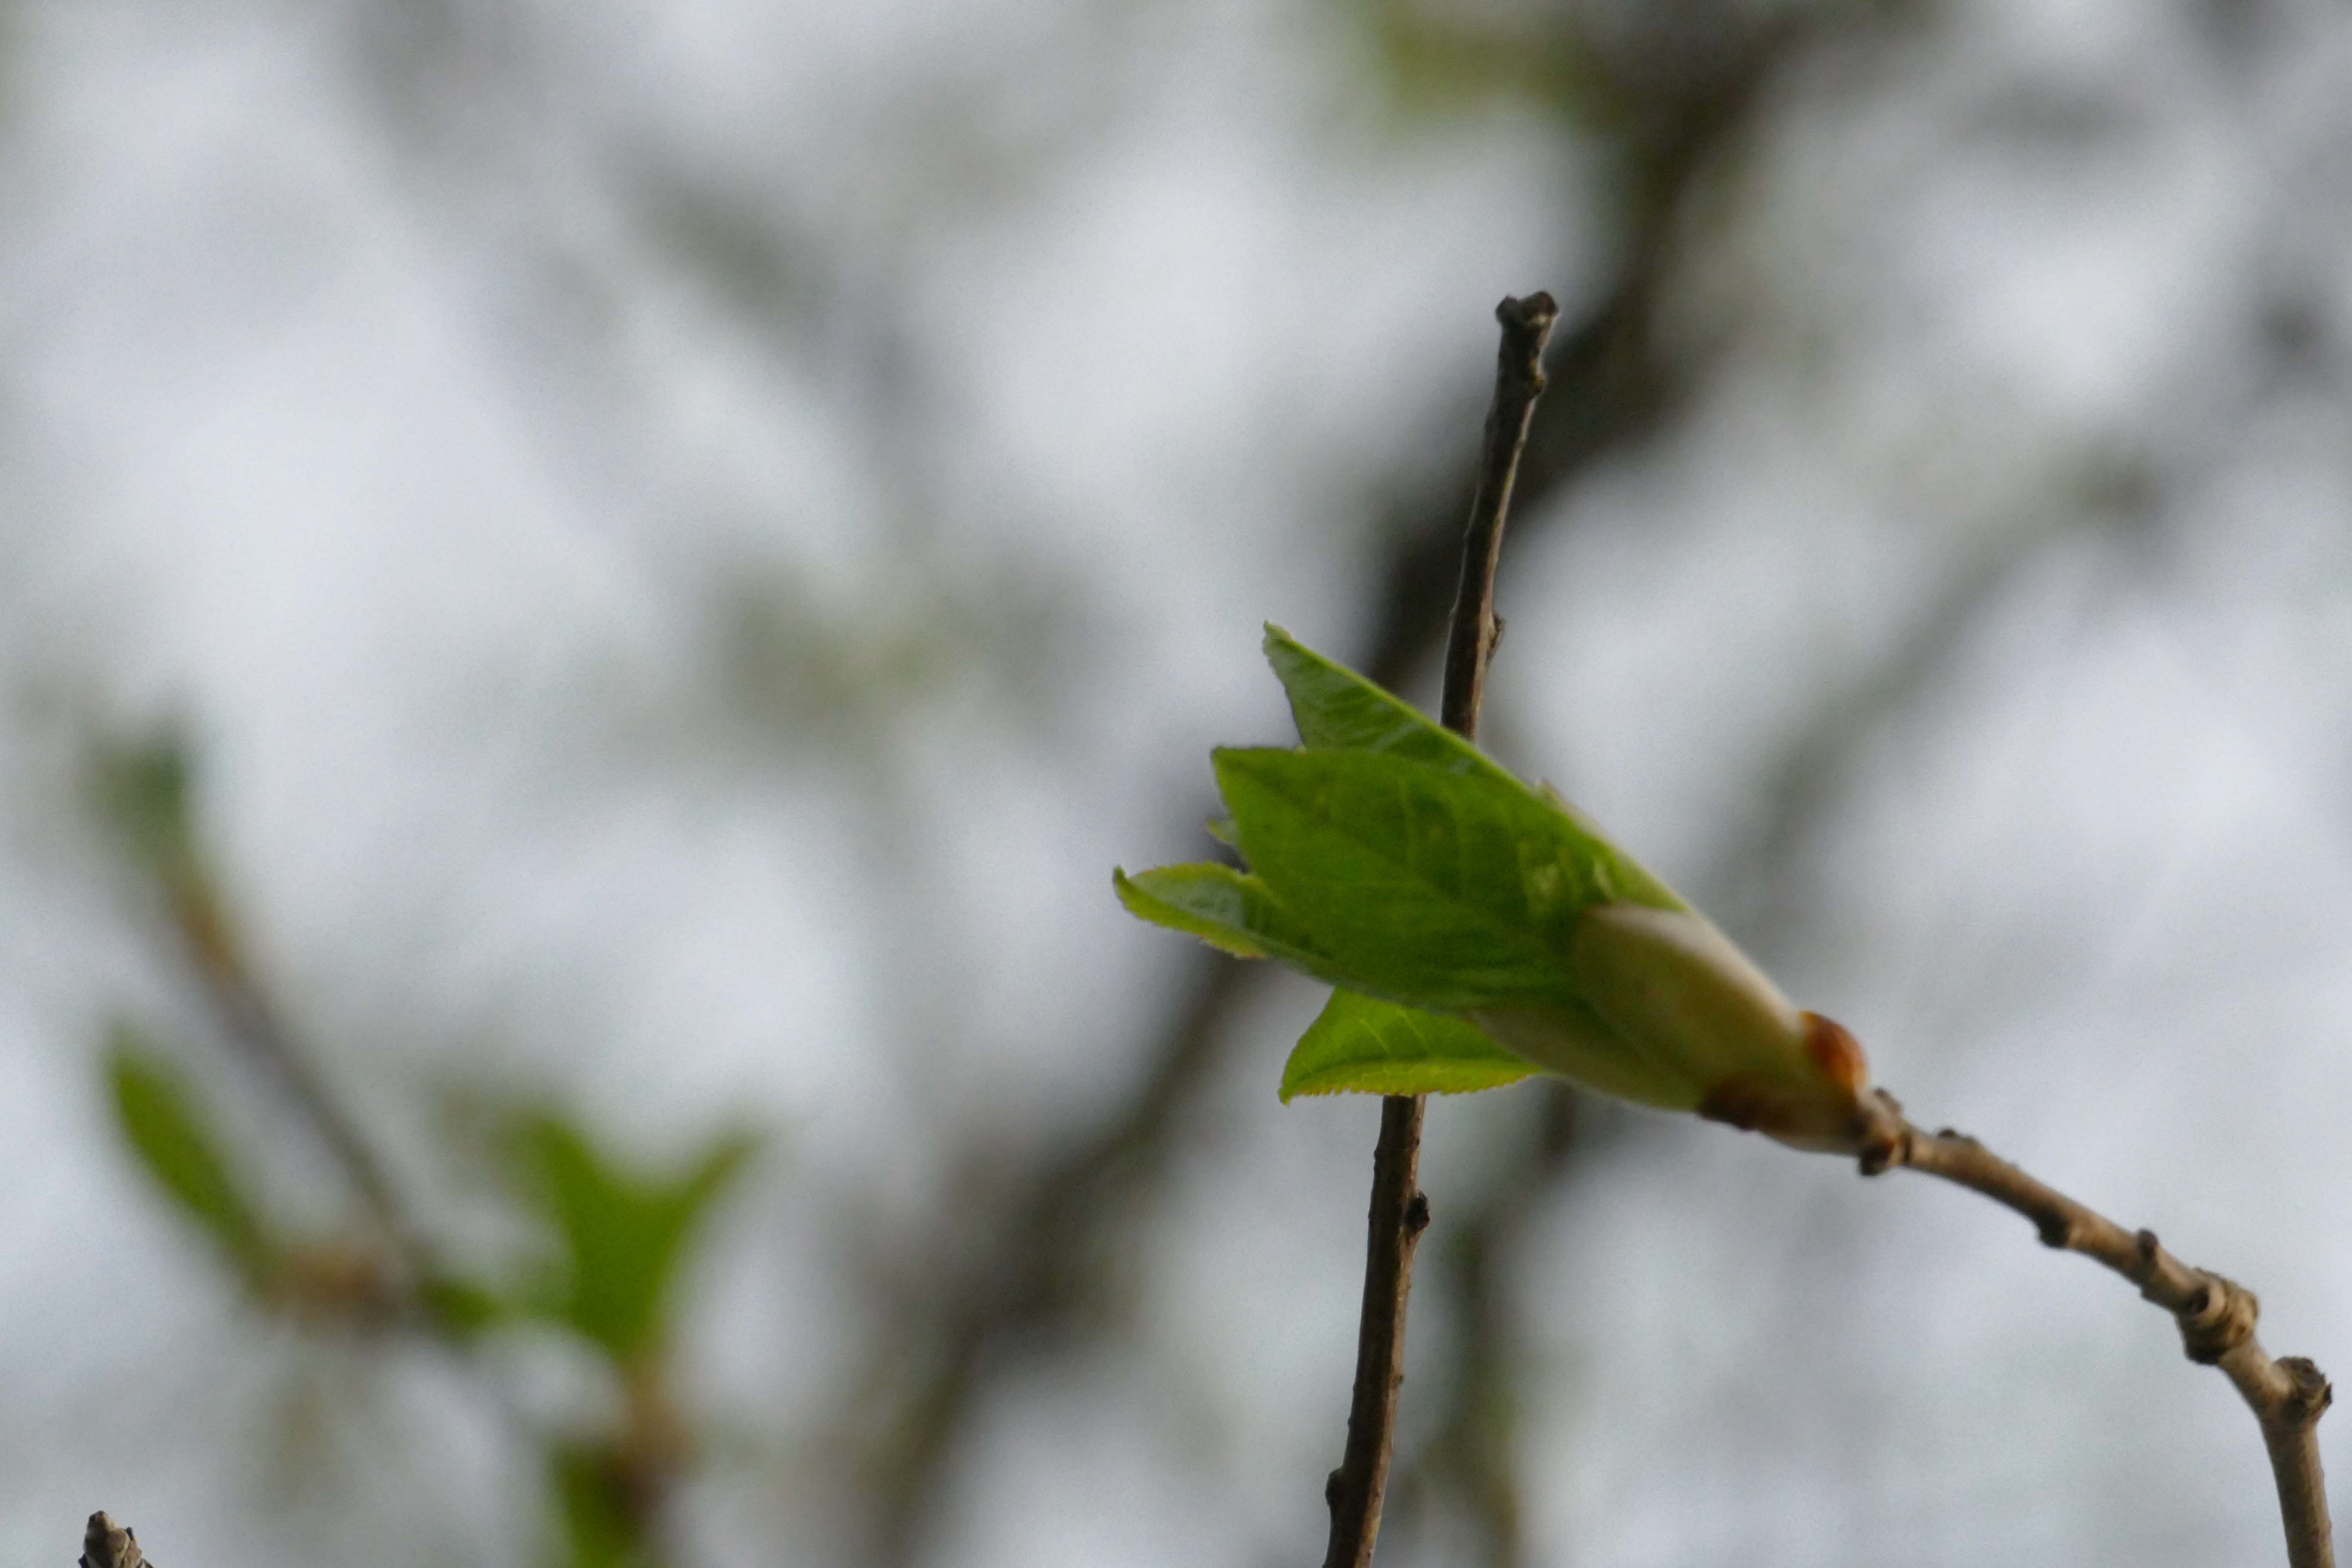 A close up photo of a tree branch in spring with a bud opening up